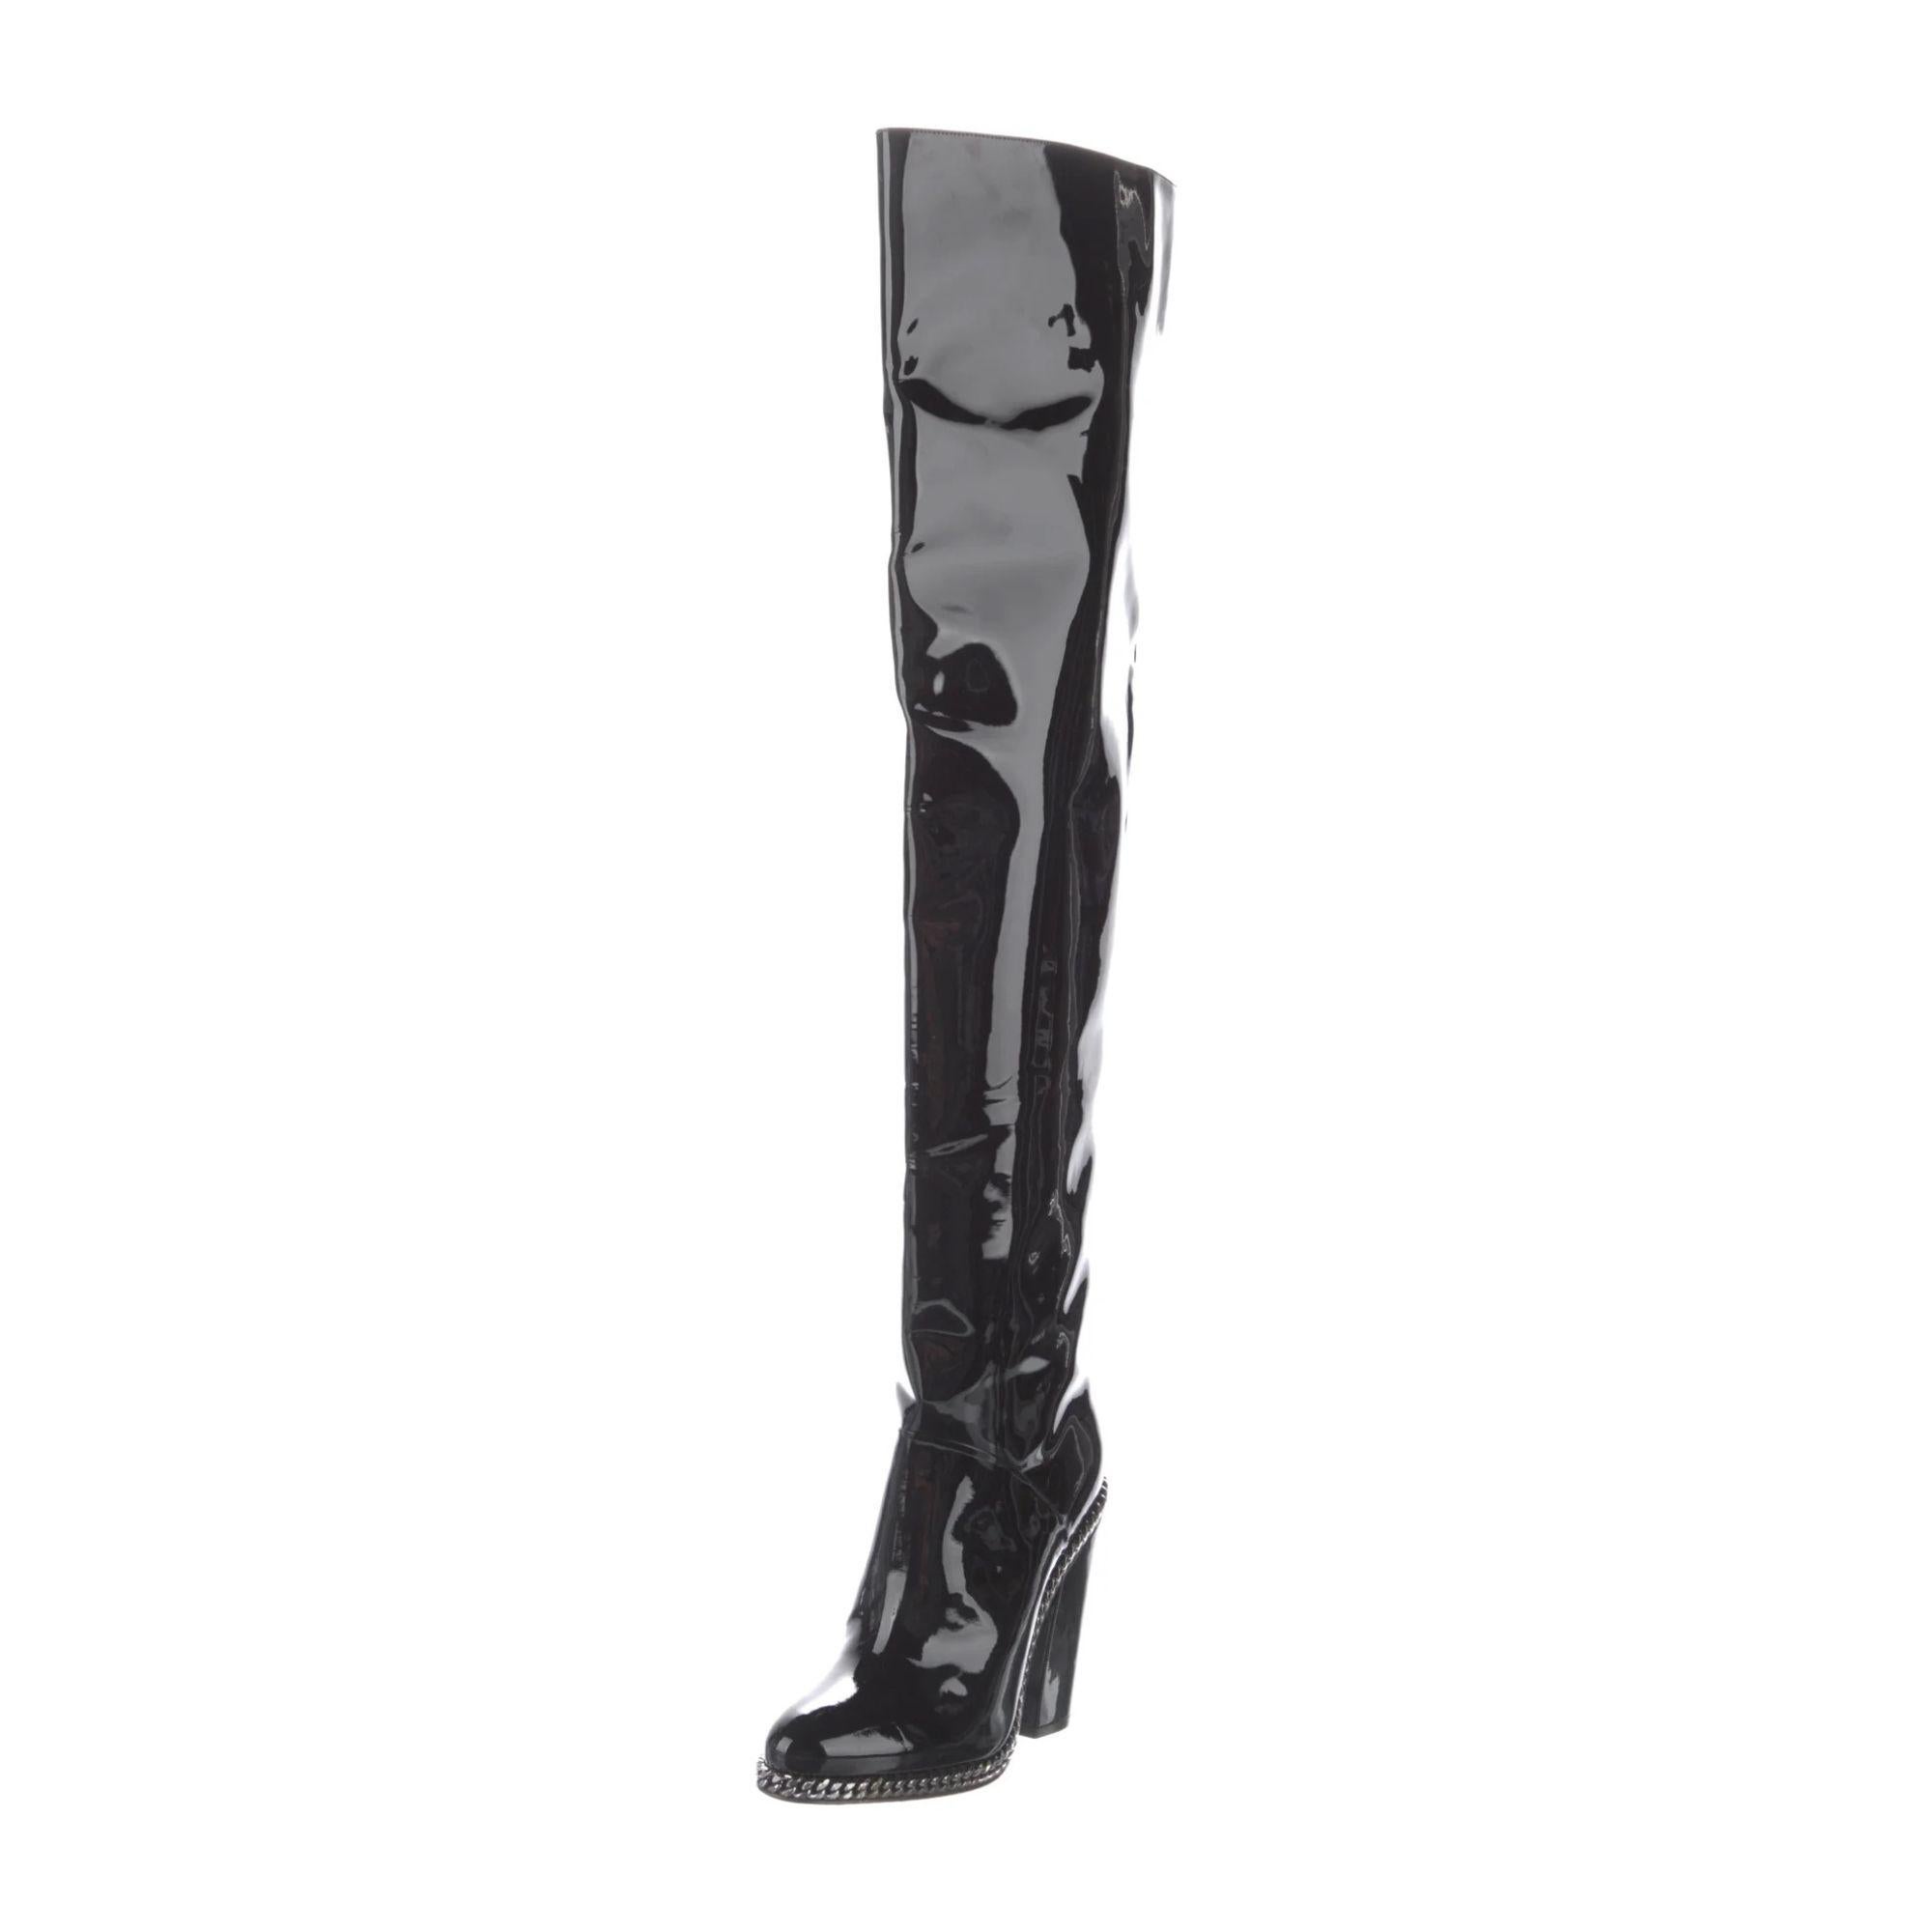 The high-heeled over-the-knee boots features patent leather, 4.1” heel, leather soles, contours adorned with a silver metal chain. Fits true to size; select your usual size. Balmain reference number: W8FC331PGOD176

COLOR: Black
MATERIAL: Patent